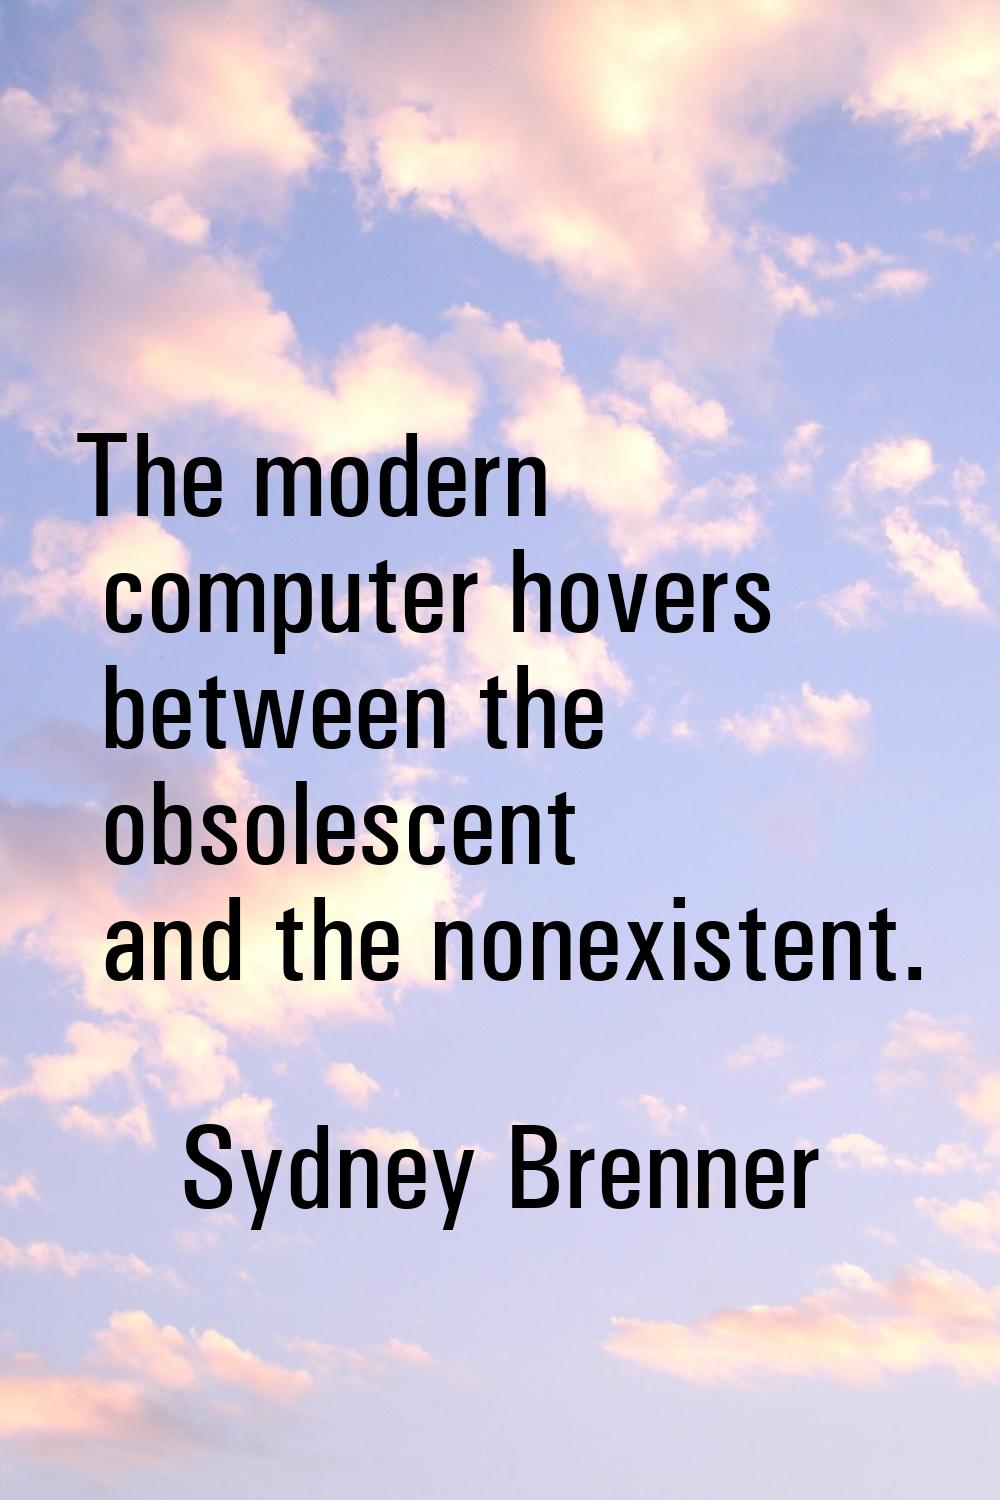 The modern computer hovers between the obsolescent and the nonexistent.